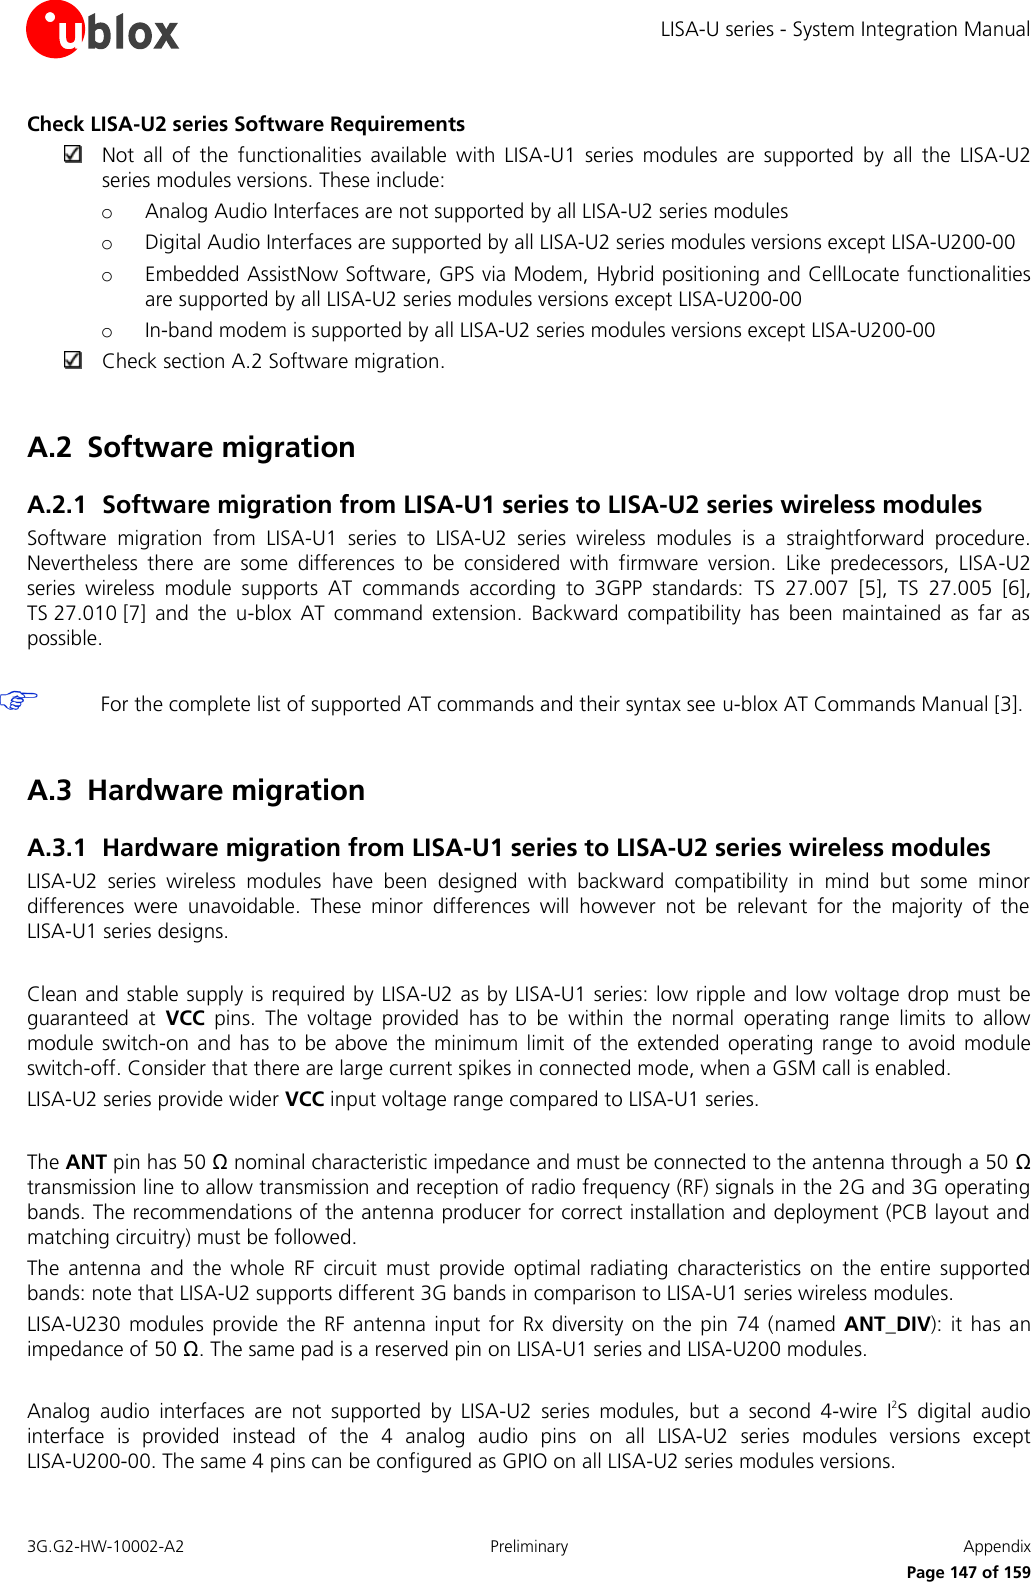 LISA-U series - System Integration Manual 3G.G2-HW-10002-A2  Preliminary  Appendix      Page 147 of 159 Check LISA-U2 series Software Requirements  Not  all  of  the  functionalities  available  with  LISA-U1  series  modules  are  supported  by  all  the  LISA-U2 series modules versions. These include: o Analog Audio Interfaces are not supported by all LISA-U2 series modules o Digital Audio Interfaces are supported by all LISA-U2 series modules versions except LISA-U200-00 o Embedded AssistNow Software, GPS via Modem, Hybrid positioning and CellLocate functionalities are supported by all LISA-U2 series modules versions except LISA-U200-00 o In-band modem is supported by all LISA-U2 series modules versions except LISA-U200-00  Check section A.2 Software migration.  A.2 Software migration A.2.1 Software migration from LISA-U1 series to LISA-U2 series wireless modules Software  migration  from  LISA-U1  series  to  LISA-U2  series  wireless  modules  is  a  straightforward  procedure. Nevertheless  there  are  some  differences  to  be  considered  with  firmware  version.  Like  predecessors,  LISA-U2 series  wireless  module  supports  AT  commands  according  to  3GPP  standards:  TS  27.007 [5],  TS 27.005 [6], TS 27.010 [7]  and  the  u-blox  AT  command  extension.  Backward  compatibility  has  been  maintained  as  far  as possible.   For the complete list of supported AT commands and their syntax see u-blox AT Commands Manual [3].  A.3 Hardware migration A.3.1 Hardware migration from LISA-U1 series to LISA-U2 series wireless modules LISA-U2  series  wireless  modules  have  been  designed  with  backward  compatibility  in  mind  but  some  minor differences  were  unavoidable.  These  minor  differences  will  however  not  be  relevant  for  the  majority  of  the LISA-U1 series designs.  Clean and stable supply is required by LISA-U2 as by LISA-U1 series: low ripple and low voltage drop must be guaranteed  at  VCC  pins.  The  voltage  provided  has  to  be  within  the  normal  operating  range  limits  to  allow module switch-on  and has  to be  above  the  minimum limit  of the  extended  operating  range  to avoid  module switch-off. Consider that there are large current spikes in connected mode, when a GSM call is enabled. LISA-U2 series provide wider VCC input voltage range compared to LISA-U1 series.  The ANT pin has 50 Ω nominal characteristic impedance and must be connected to the antenna through a 50 Ω transmission line to allow transmission and reception of radio frequency (RF) signals in the 2G and 3G operating bands. The recommendations of the antenna producer for correct installation and deployment (PCB layout and matching circuitry) must be followed. The  antenna  and  the  whole  RF  circuit  must  provide  optimal  radiating  characteristics  on  the  entire  supported bands: note that LISA-U2 supports different 3G bands in comparison to LISA-U1 series wireless modules. LISA-U230  modules provide  the RF  antenna  input for  Rx diversity on  the pin  74 (named  ANT_DIV):  it has  an impedance of 50 Ω. The same pad is a reserved pin on LISA-U1 series and LISA-U200 modules.  Analog  audio  interfaces  are  not  supported  by  LISA-U2  series  modules,  but  a  second  4-wire  I2S  digital  audio interface  is  provided  instead  of  the  4  analog  audio  pins  on  all  LISA-U2  series  modules  versions  except LISA-U200-00. The same 4 pins can be configured as GPIO on all LISA-U2 series modules versions. 